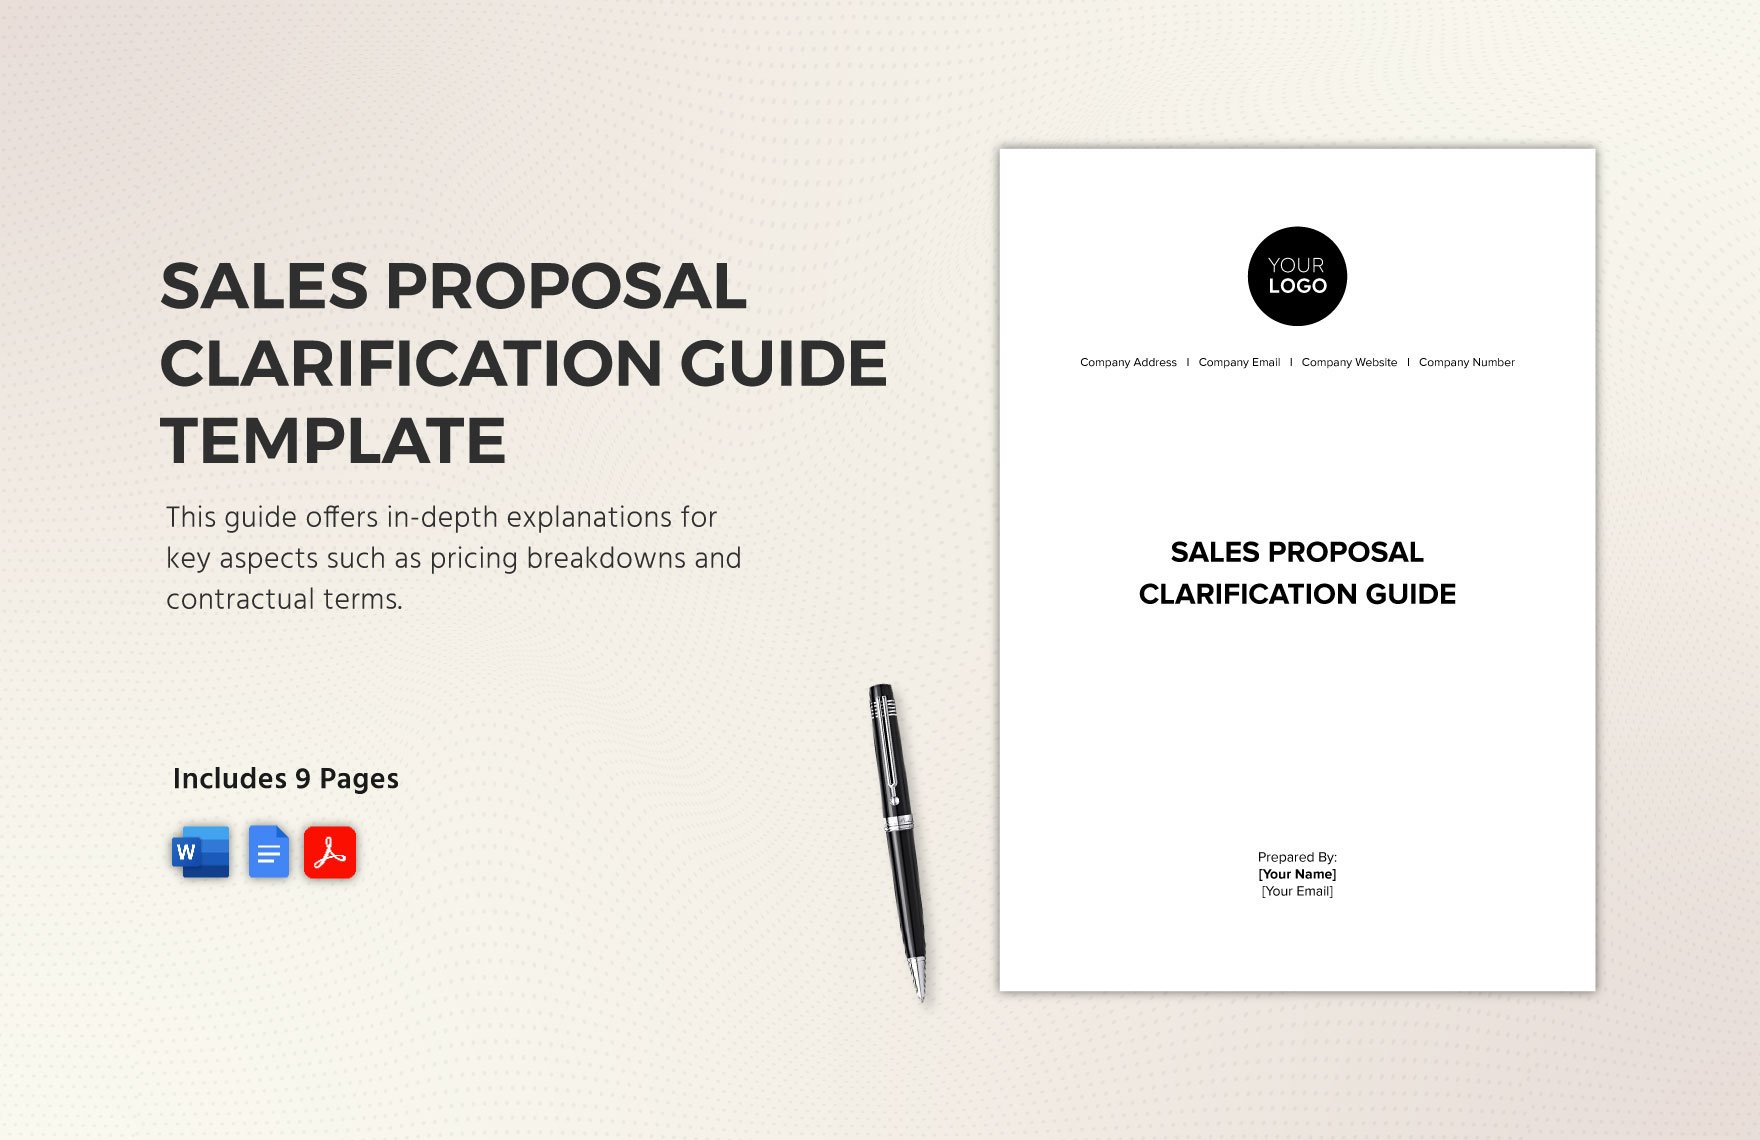 Sales Proposal Clarification Guide Template in Word, Google Docs, PDF